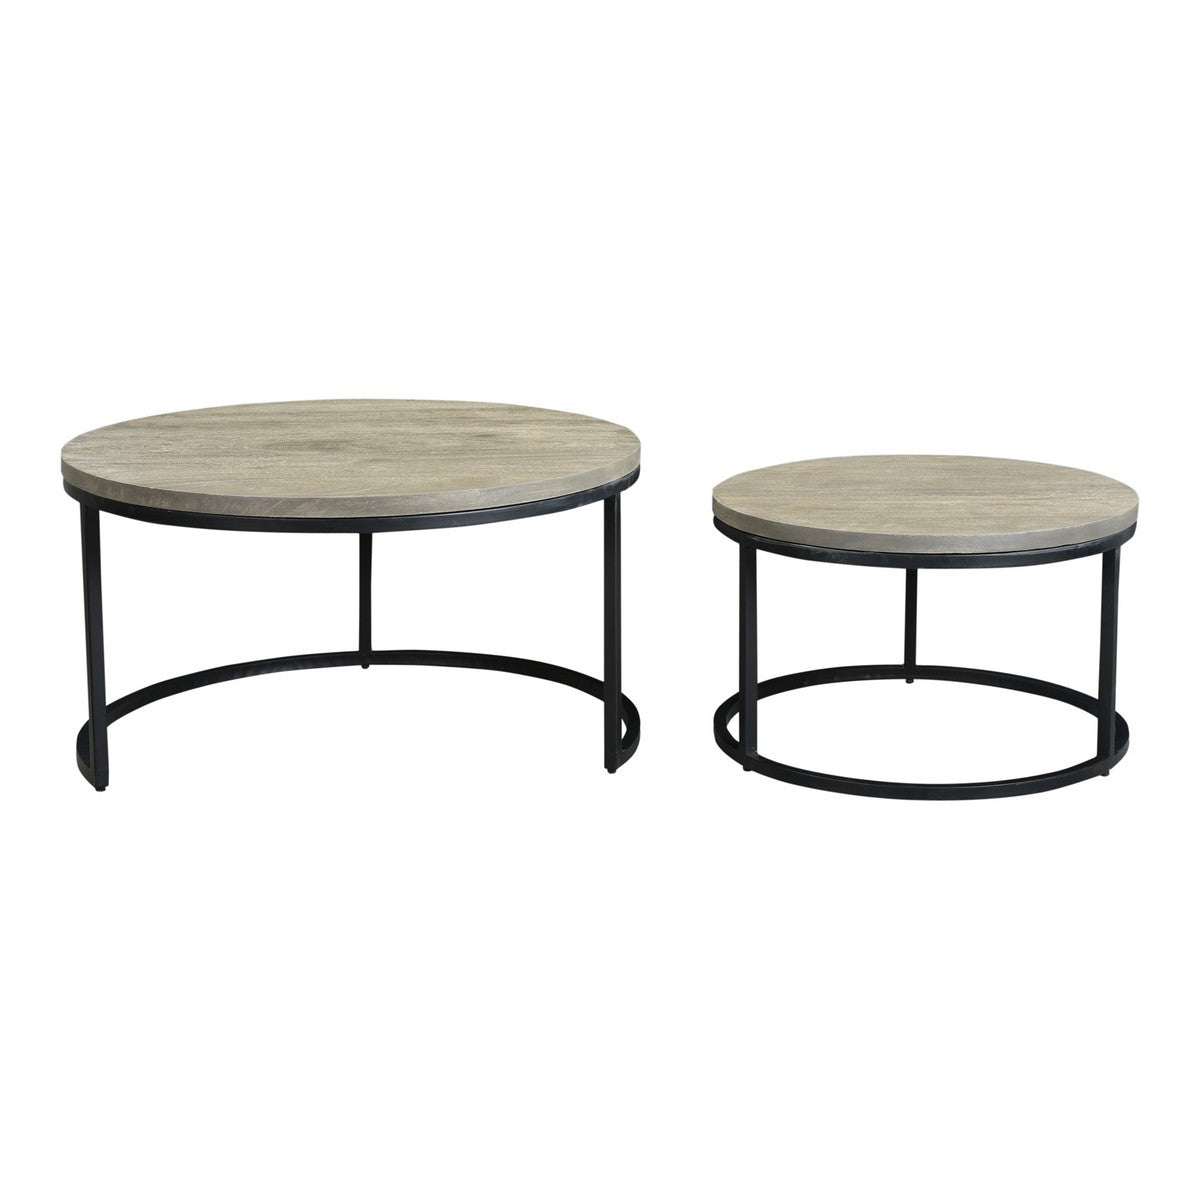 Moe's Home Collection Drey Round Nesting Coffee Tables Set of Two - BV-1011-15